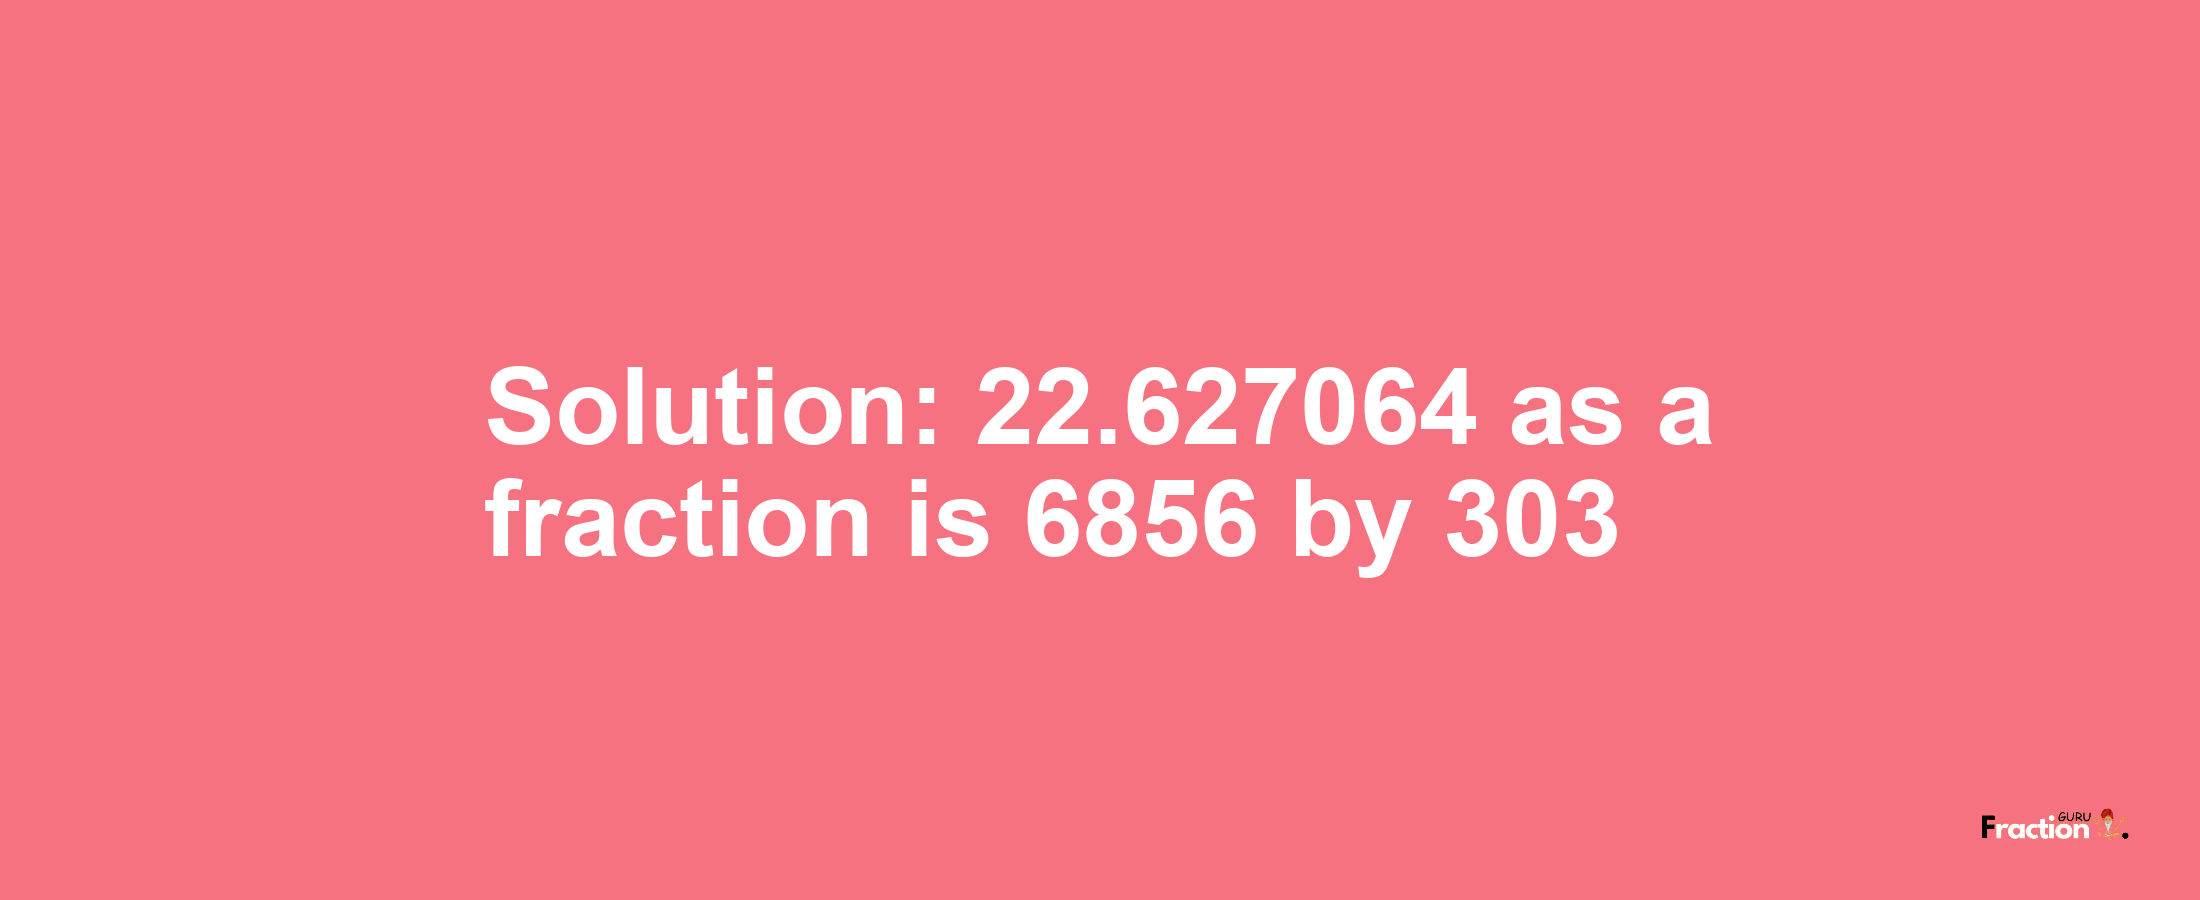 Solution:22.627064 as a fraction is 6856/303